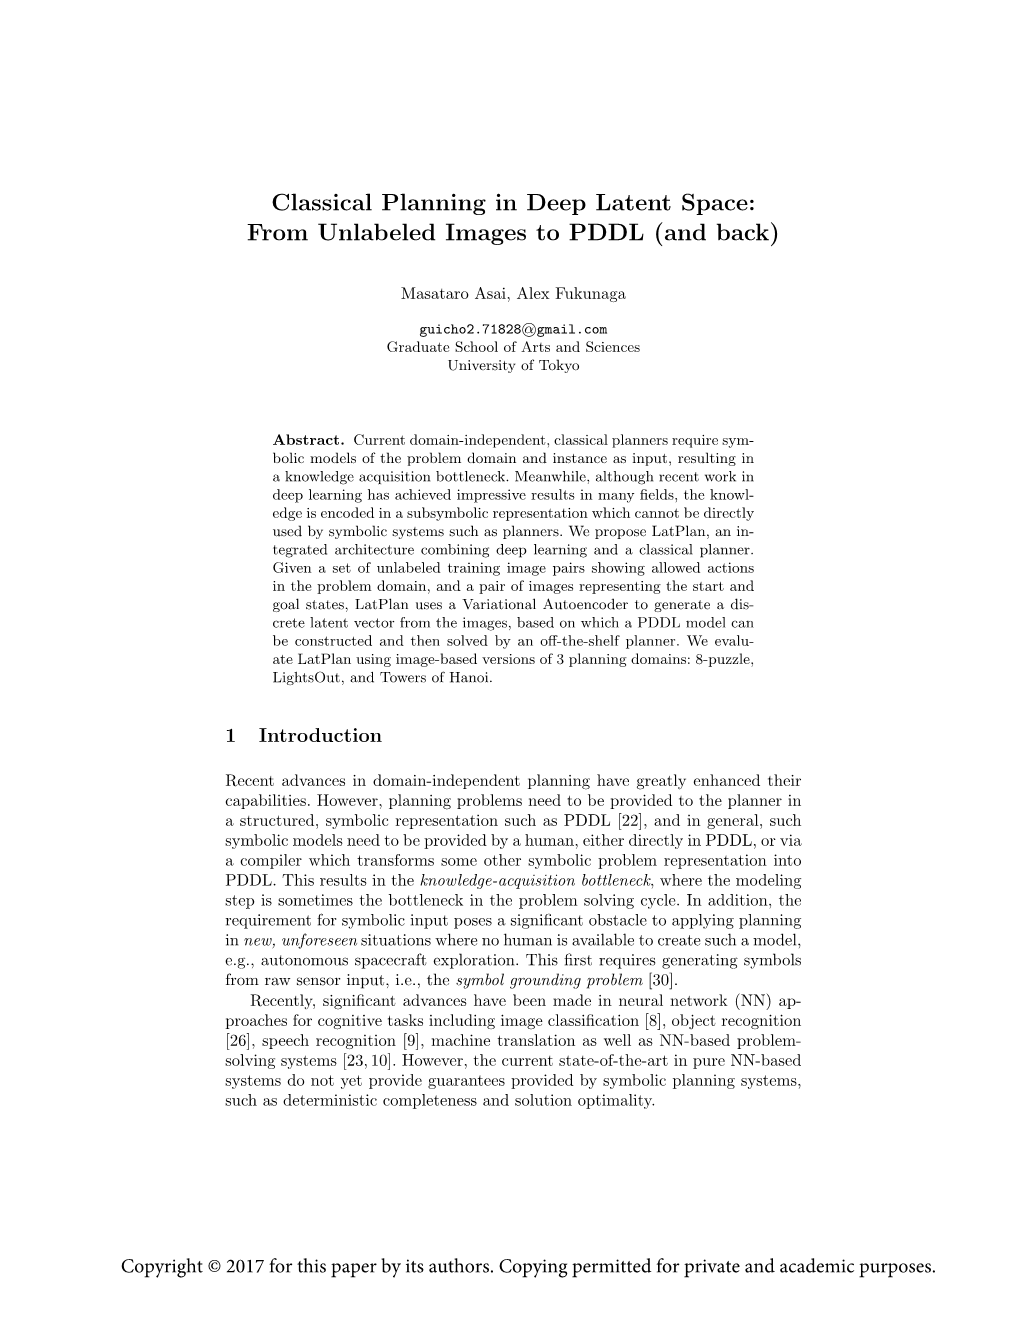 Classical Planning in Deep Latent Space: from Unlabeled Images to PDDL (And Back)